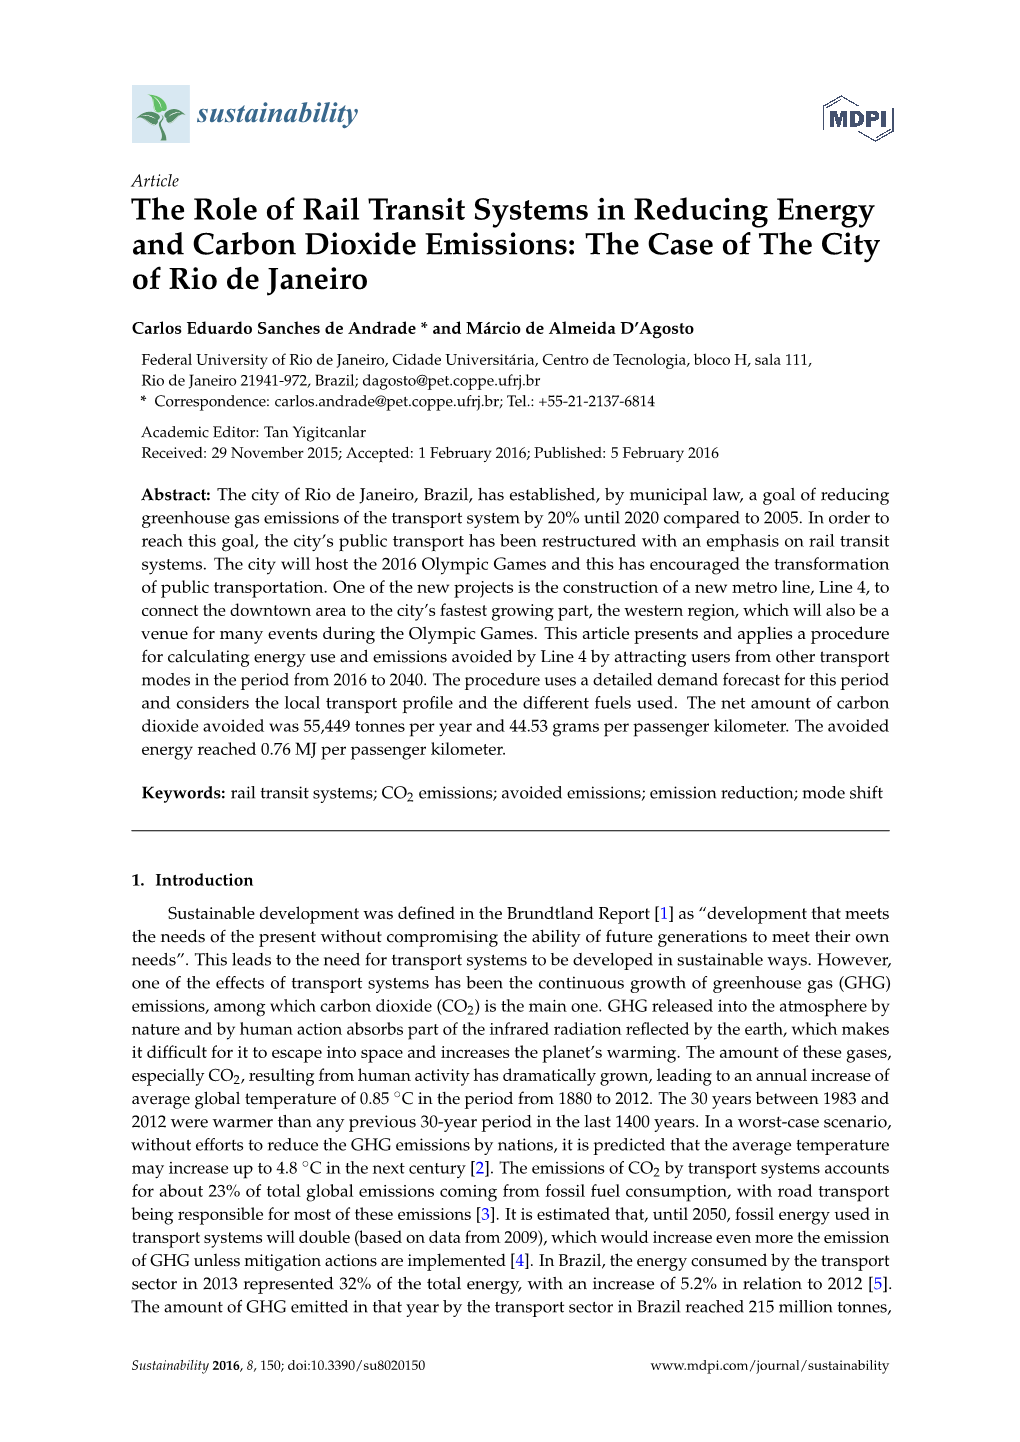 The Role of Rail Transit Systems in Reducing Energy and Carbon Dioxide Emissions: the Case of the City of Rio De Janeiro